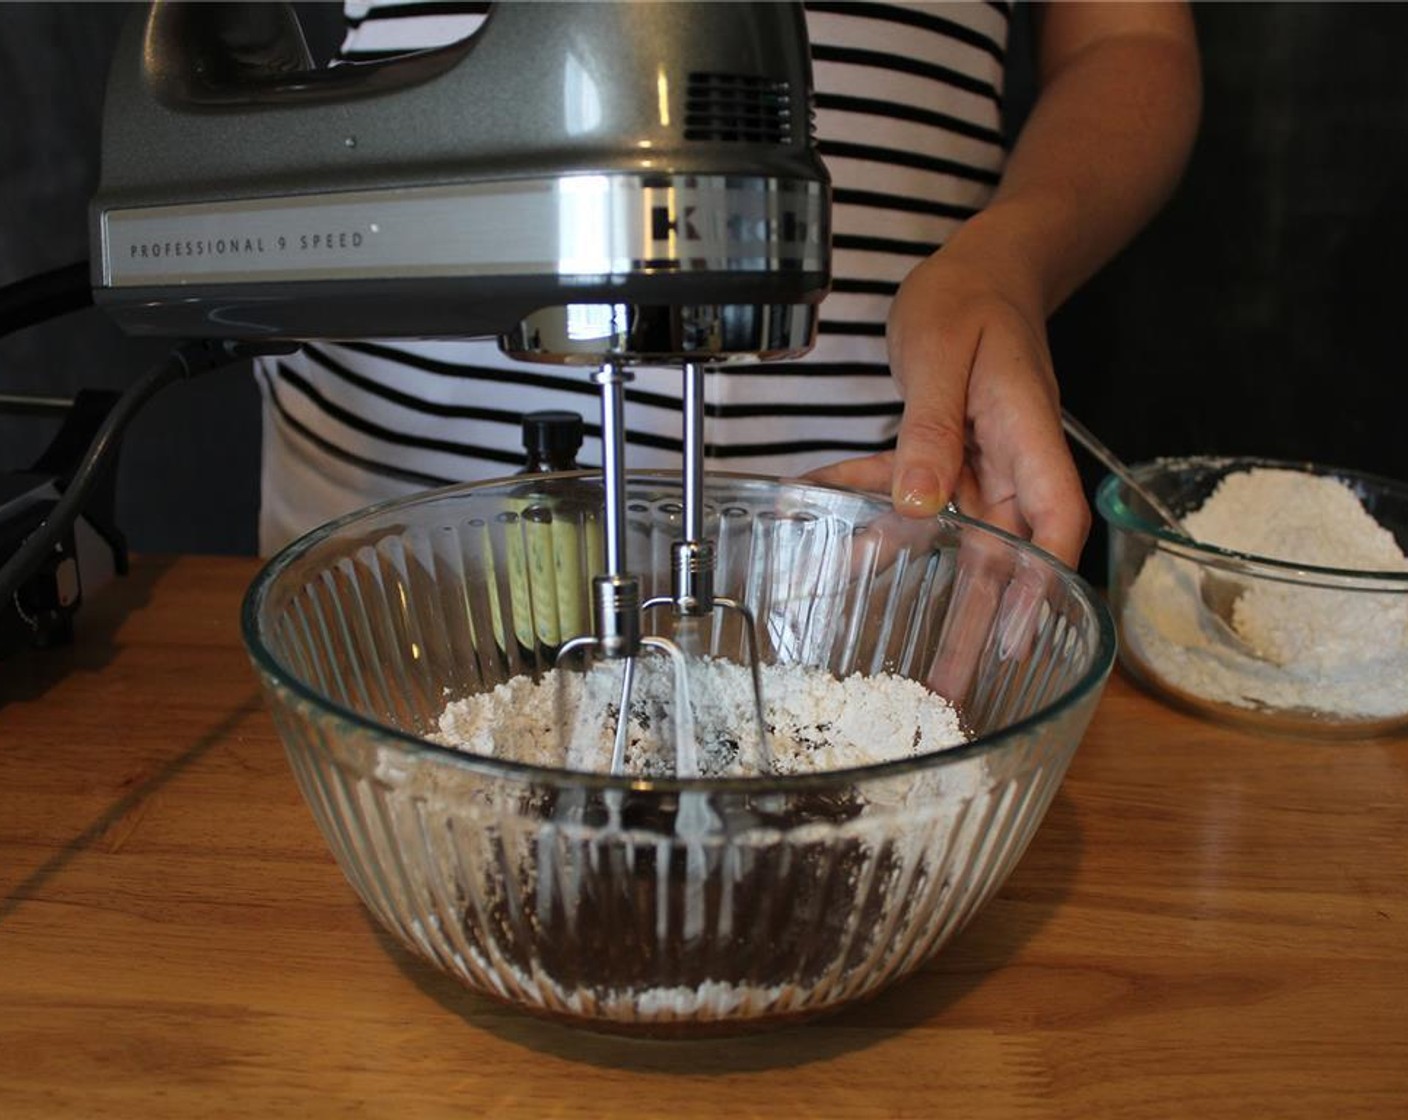 step 10 Start by adding 1/3 of the Powdered Confectioners Sugar (1 cup) into the bowl and beat with a hand mixer.